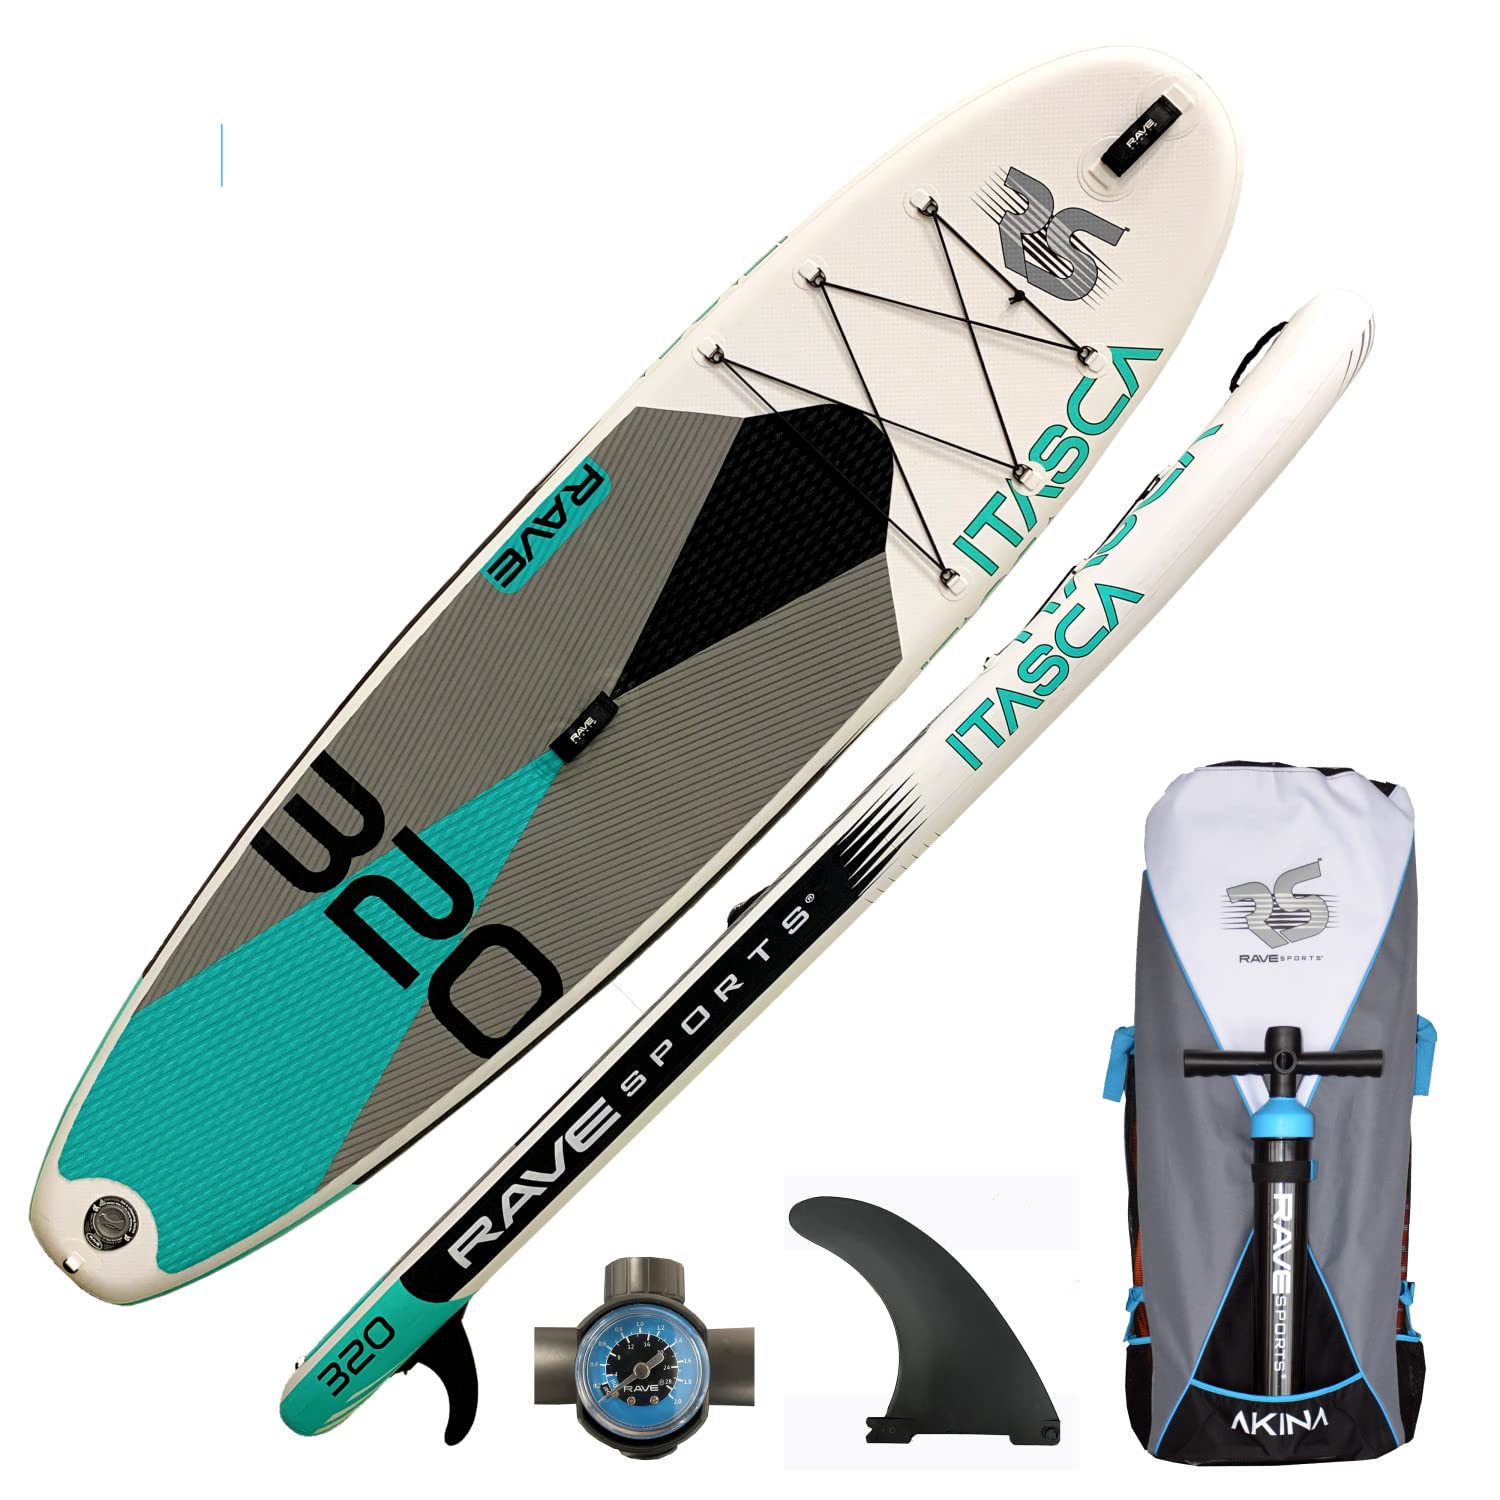 RAVE Sports Itasca iSUP Stand-Up Paddleboard